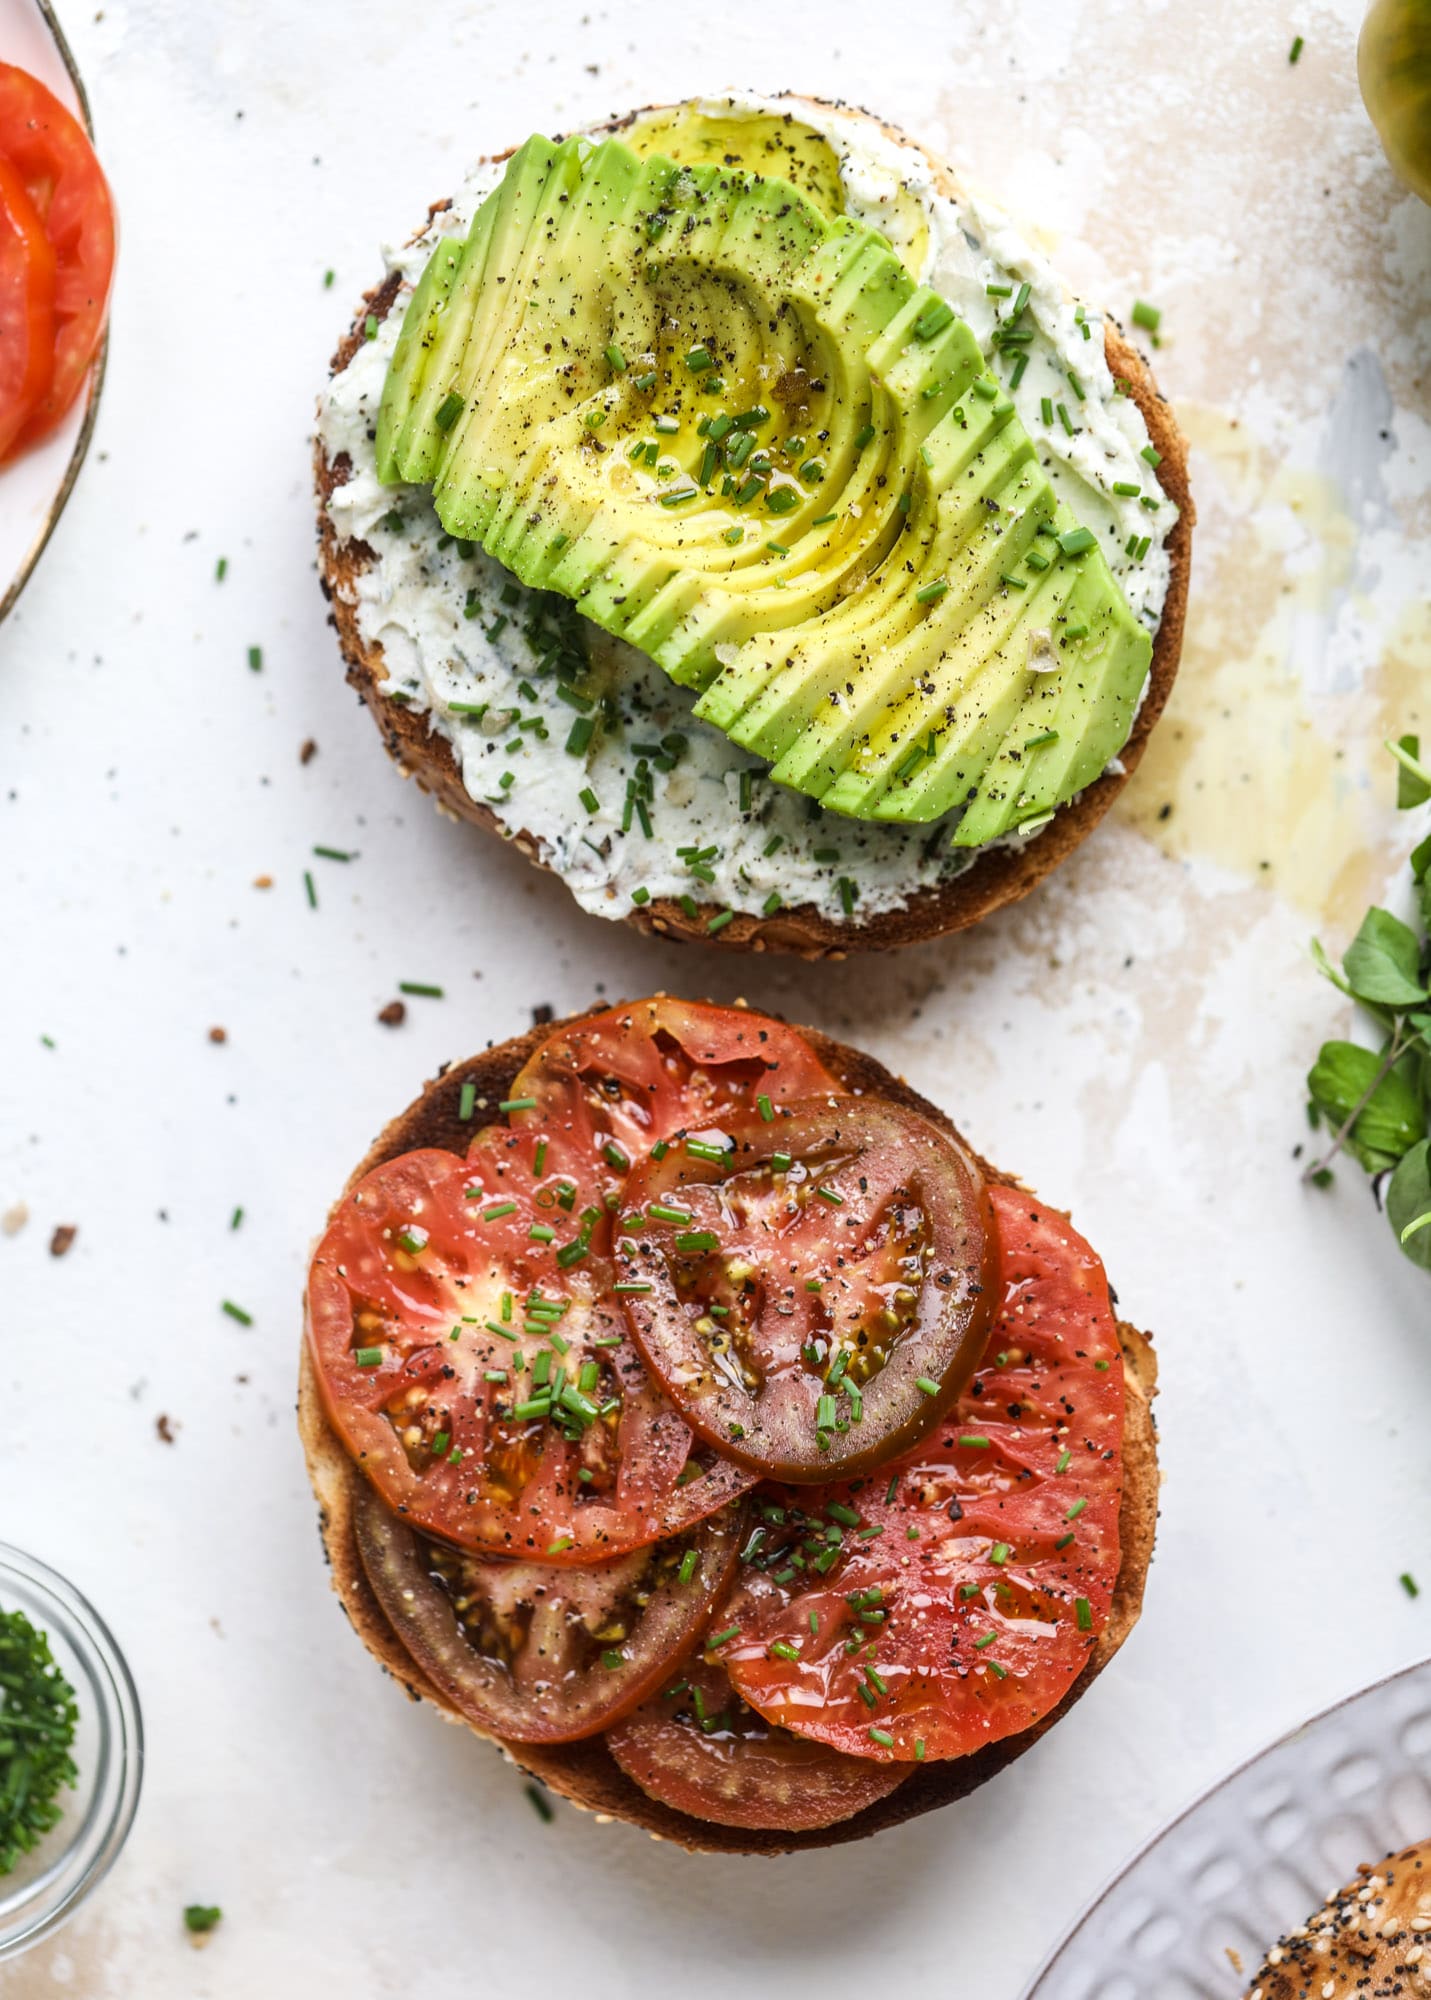 These are my top 45 favorite lunch ideas that make eating at work so much more delicious! These easy, mostly make-ahead and healthy lunch ideas are perfect to prep and plan for your week and a great way to stay on track for the new year. I howsweeteats.com #lunch #ideas